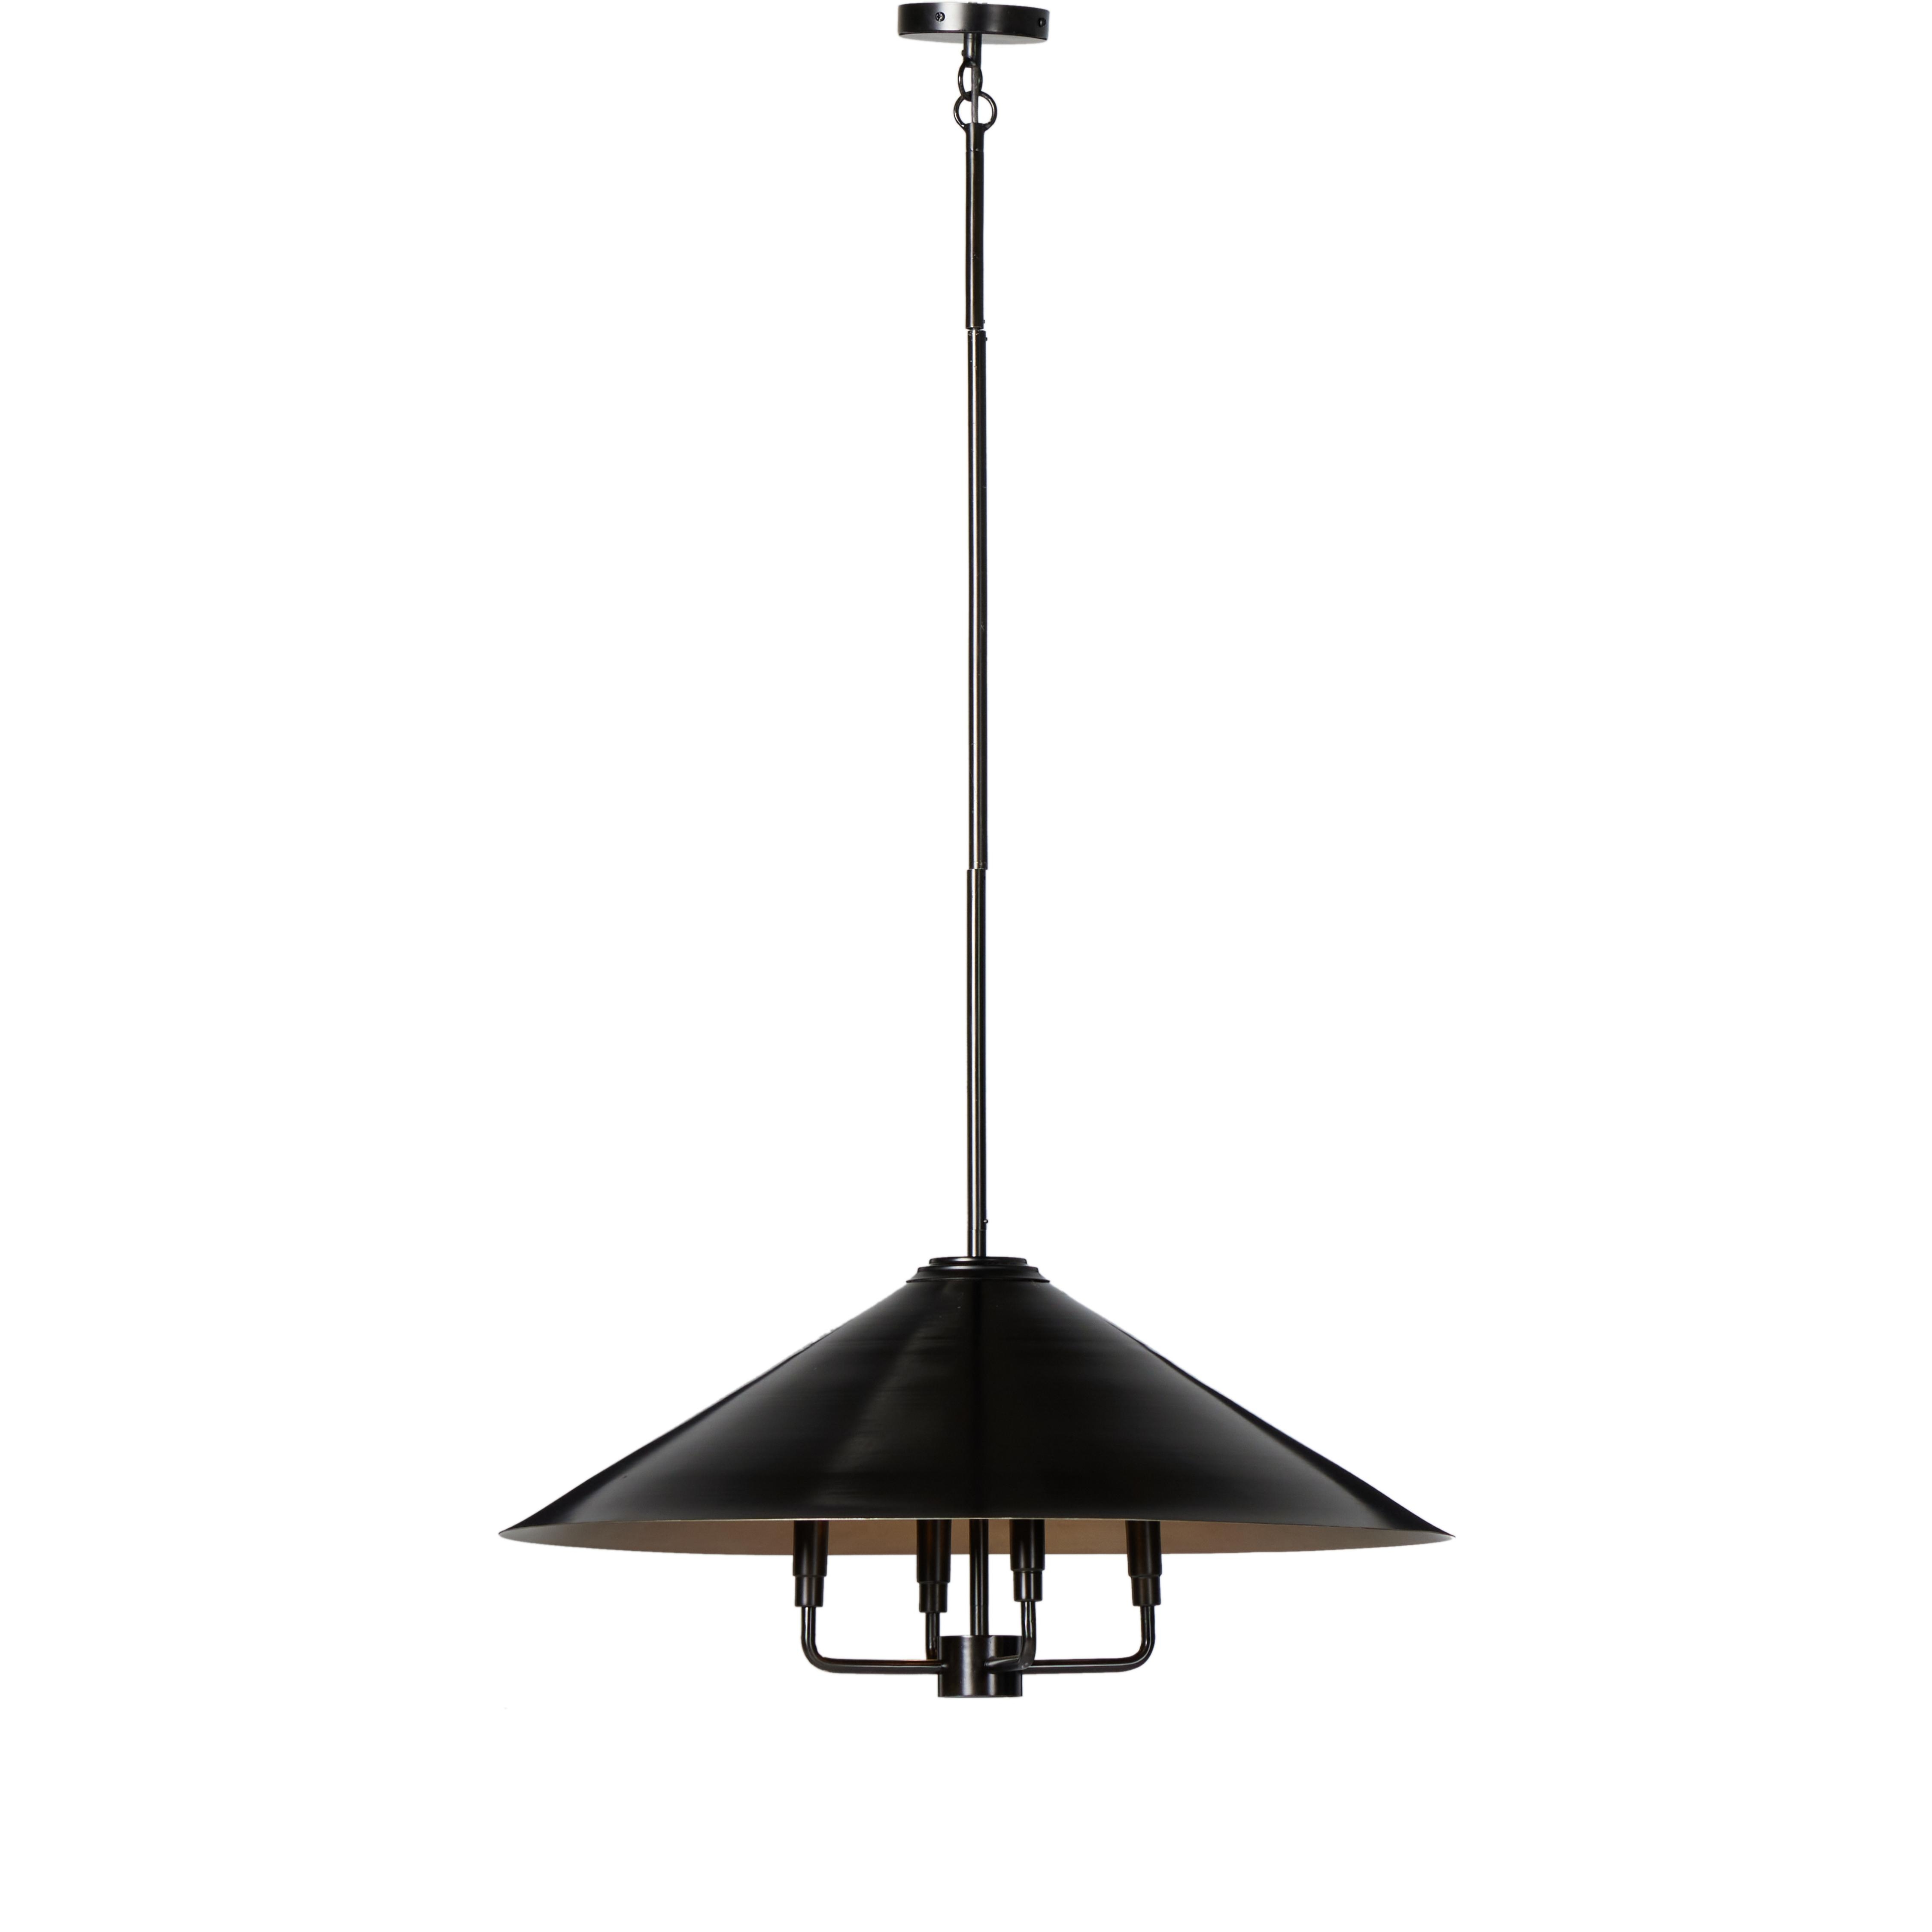 Siriano Chandelier-Oil Rubbed Bronze - Image 0